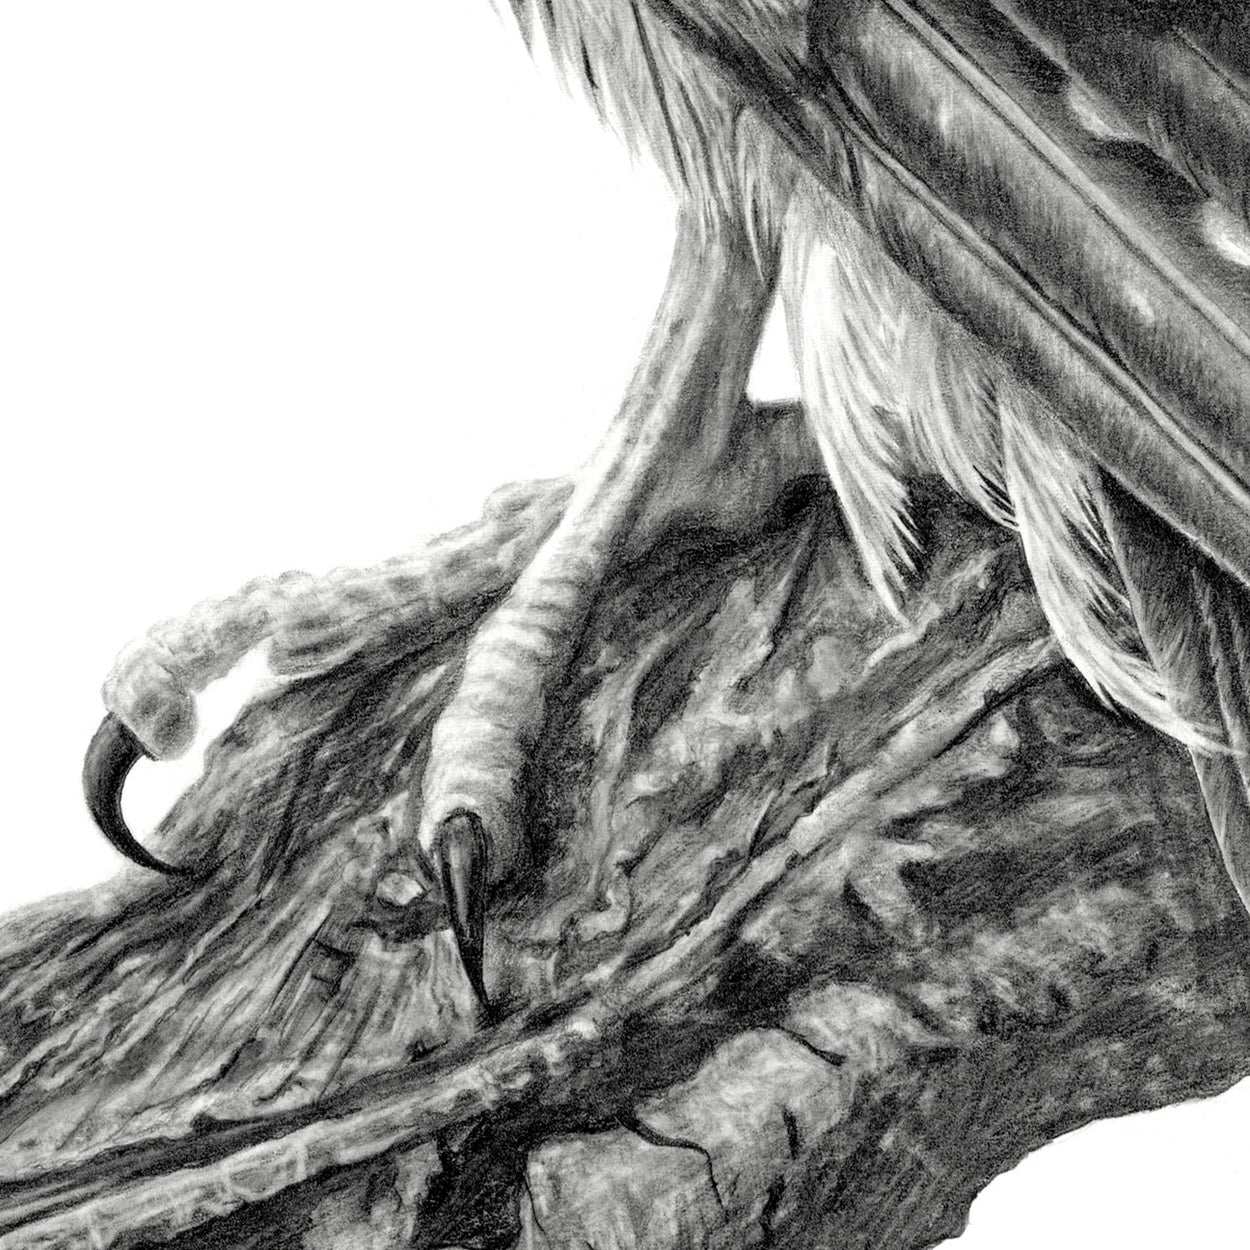 Merlin Bird of Prey Foot Close-up Drawing - The Thriving Wild